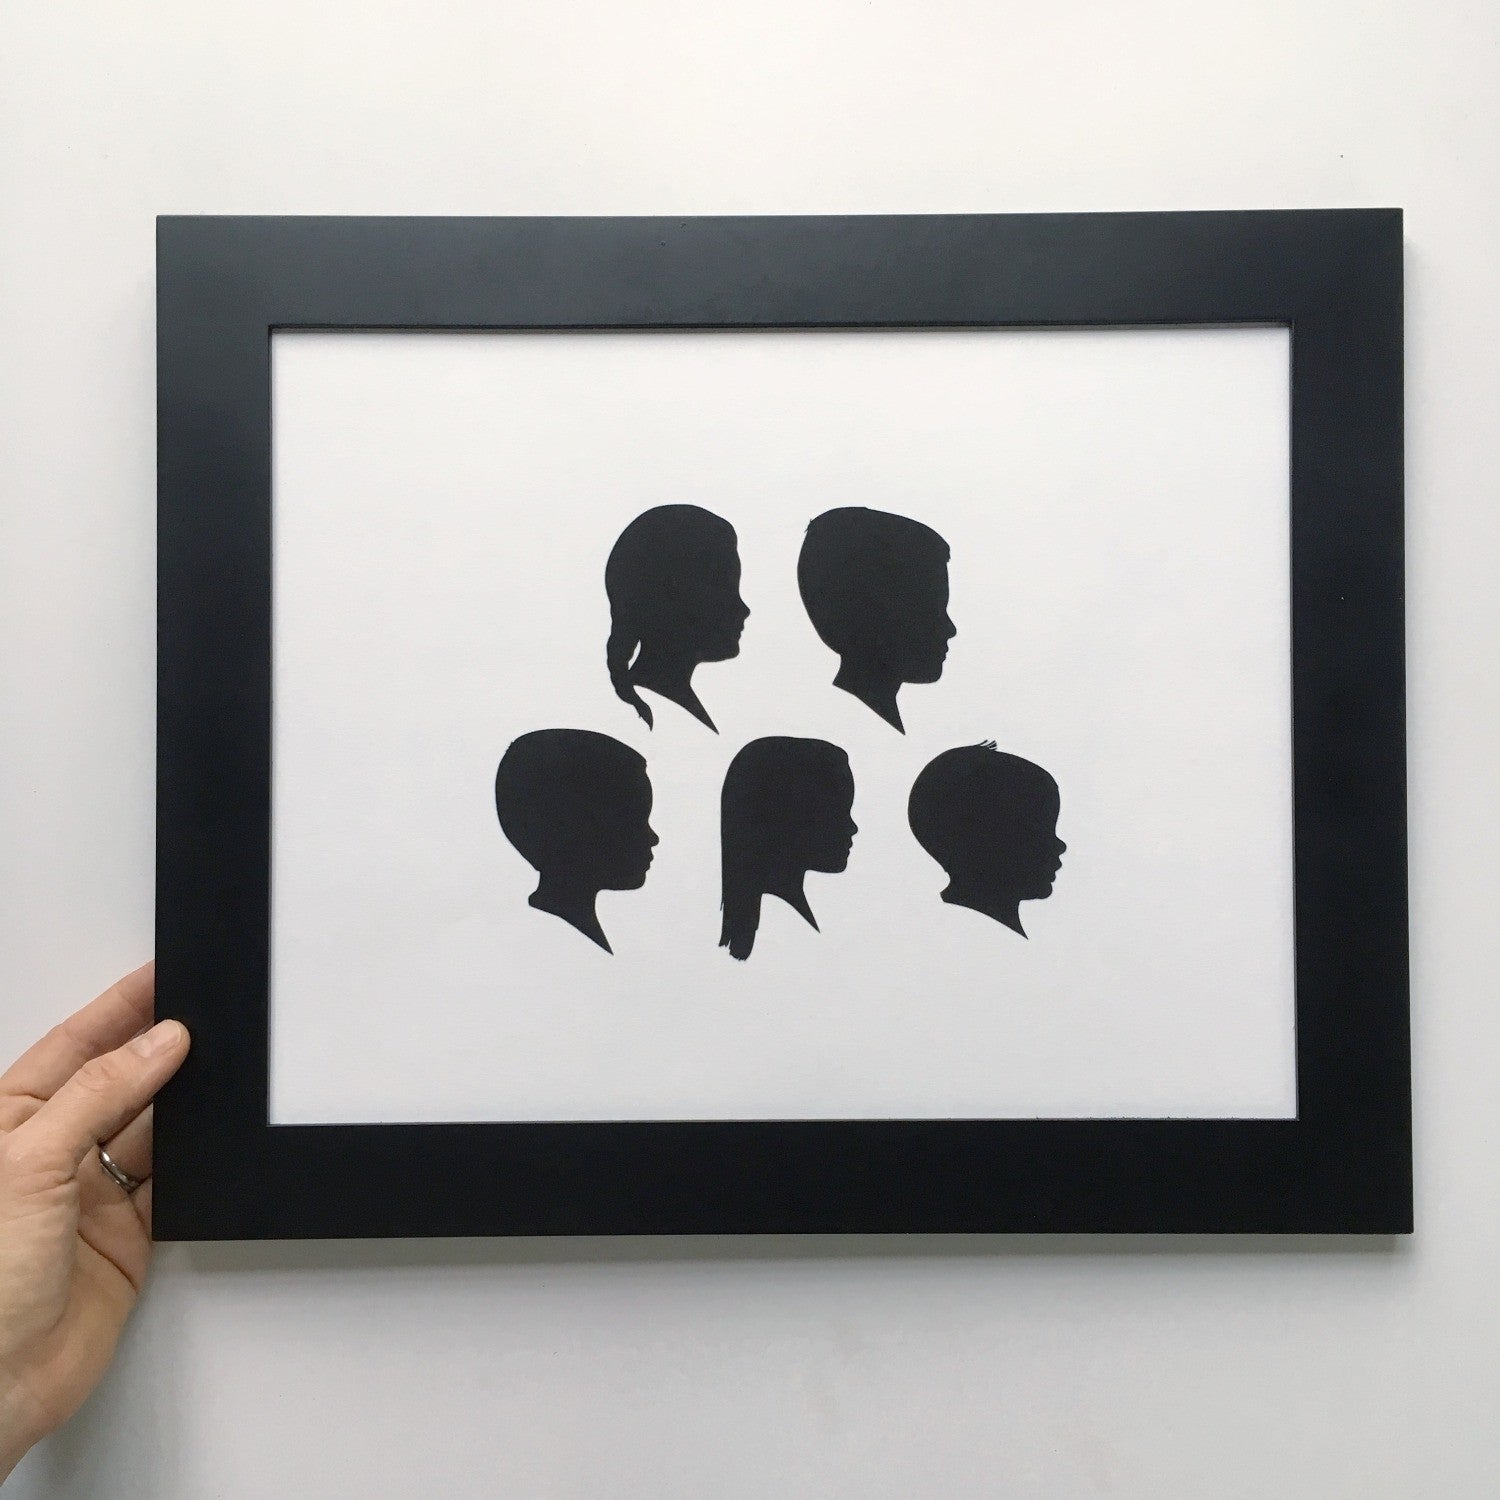 11x14" with Five Silhouette Paper-Cuts